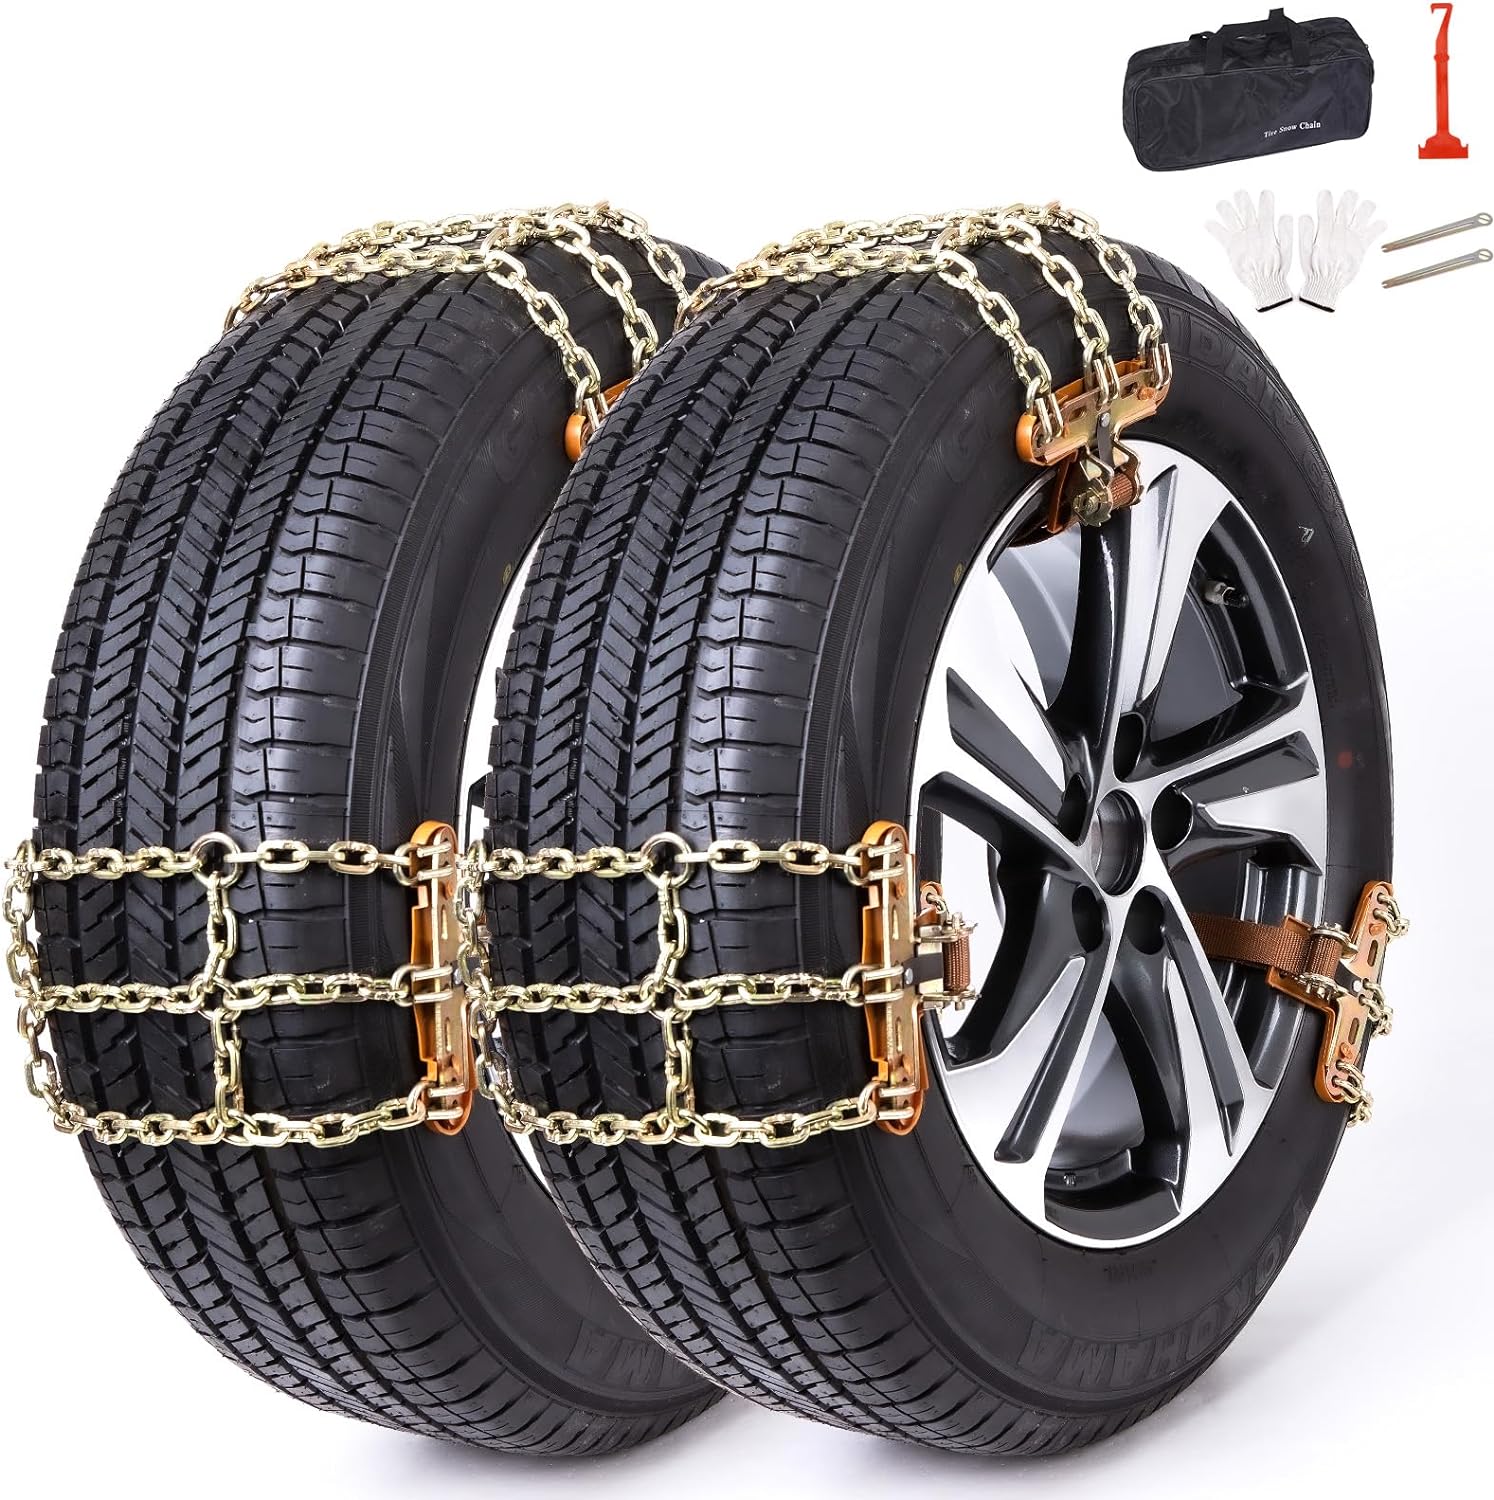  20PCS Reusable Anti Snow Chains of Car，Universal Adjustable  Emergency Portable Snow Tire Chains for Car SUV Pickup Trucks Car Snow  Chains Non-Slip Cable Tie，Adjustable Zip-tie : Automotive